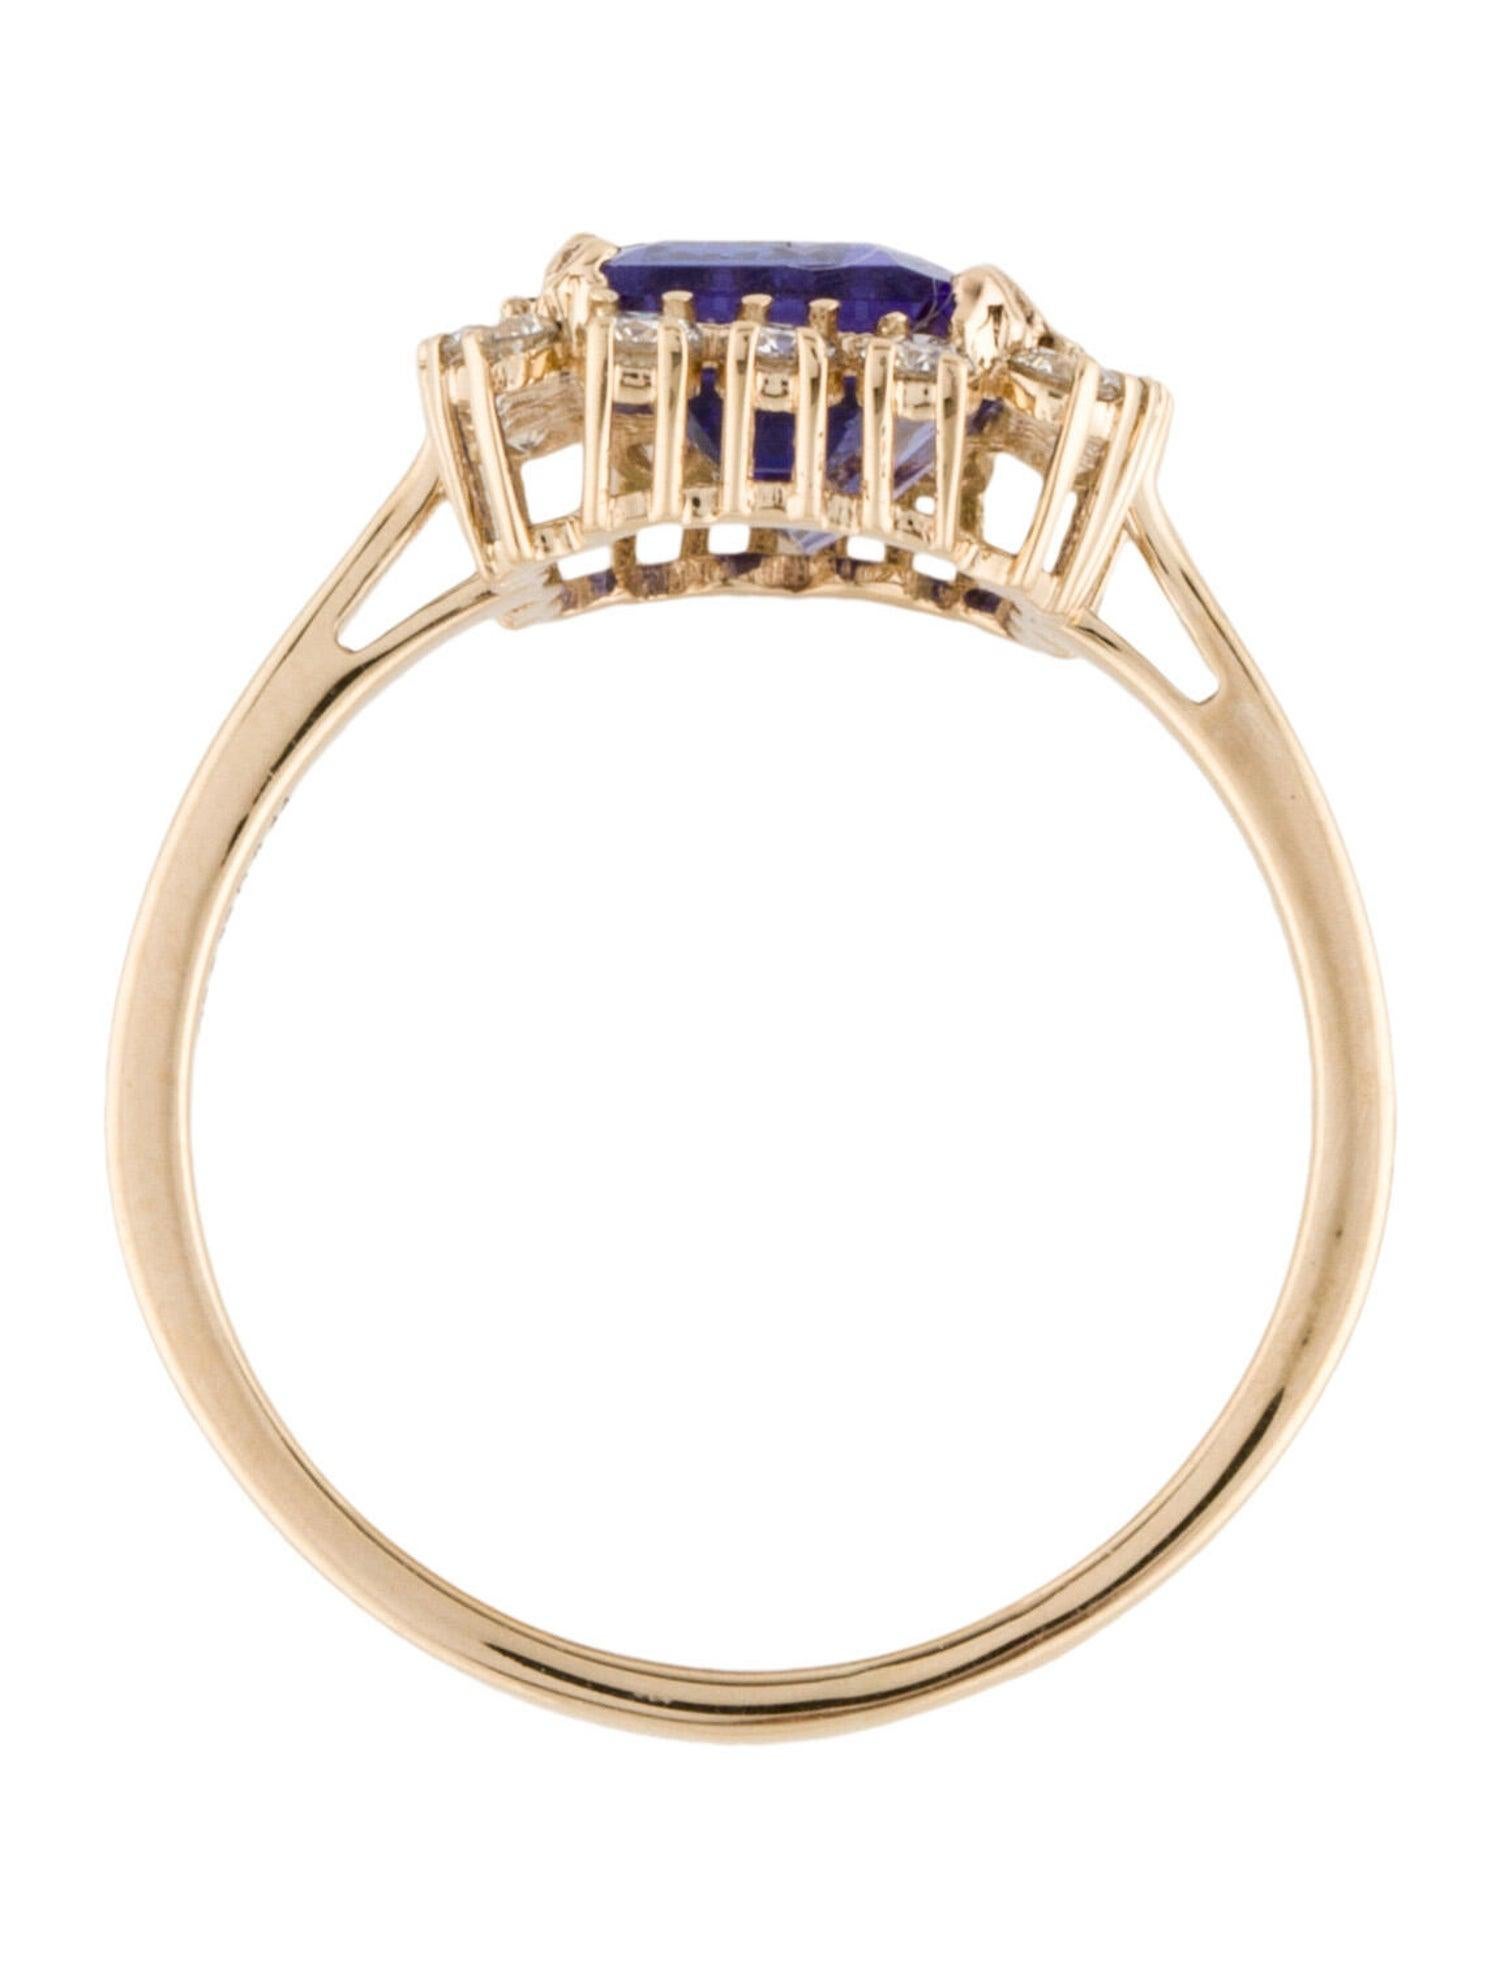 14K Tanzanite & Diamond Cocktail Ring 2.32ctw - Size 6.75 - Elegant Jewelry In New Condition For Sale In Holtsville, NY